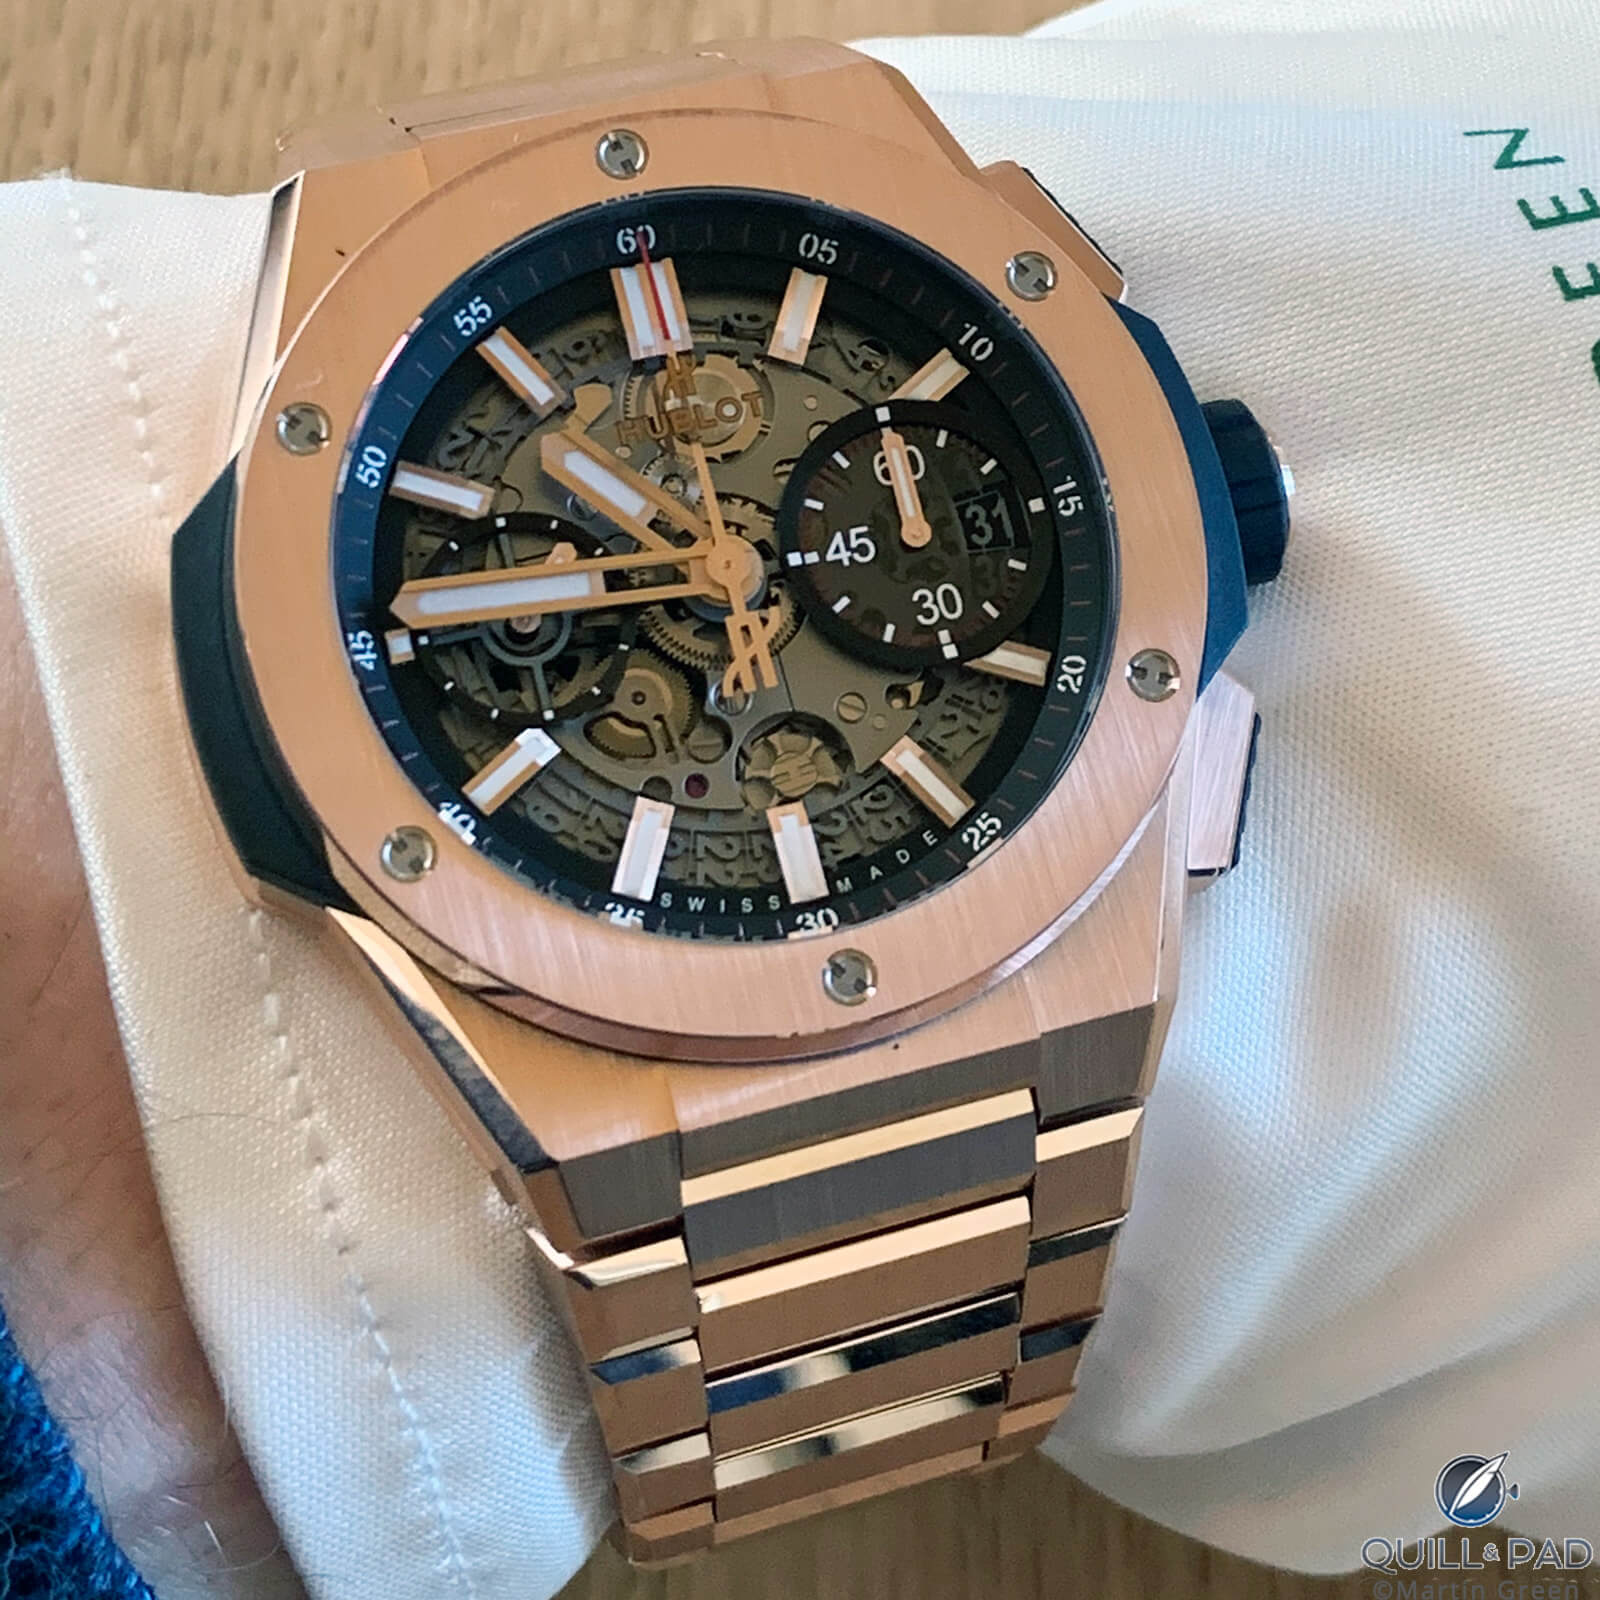 Hublot and Bulgari post growing results on the sidelines of LVMH